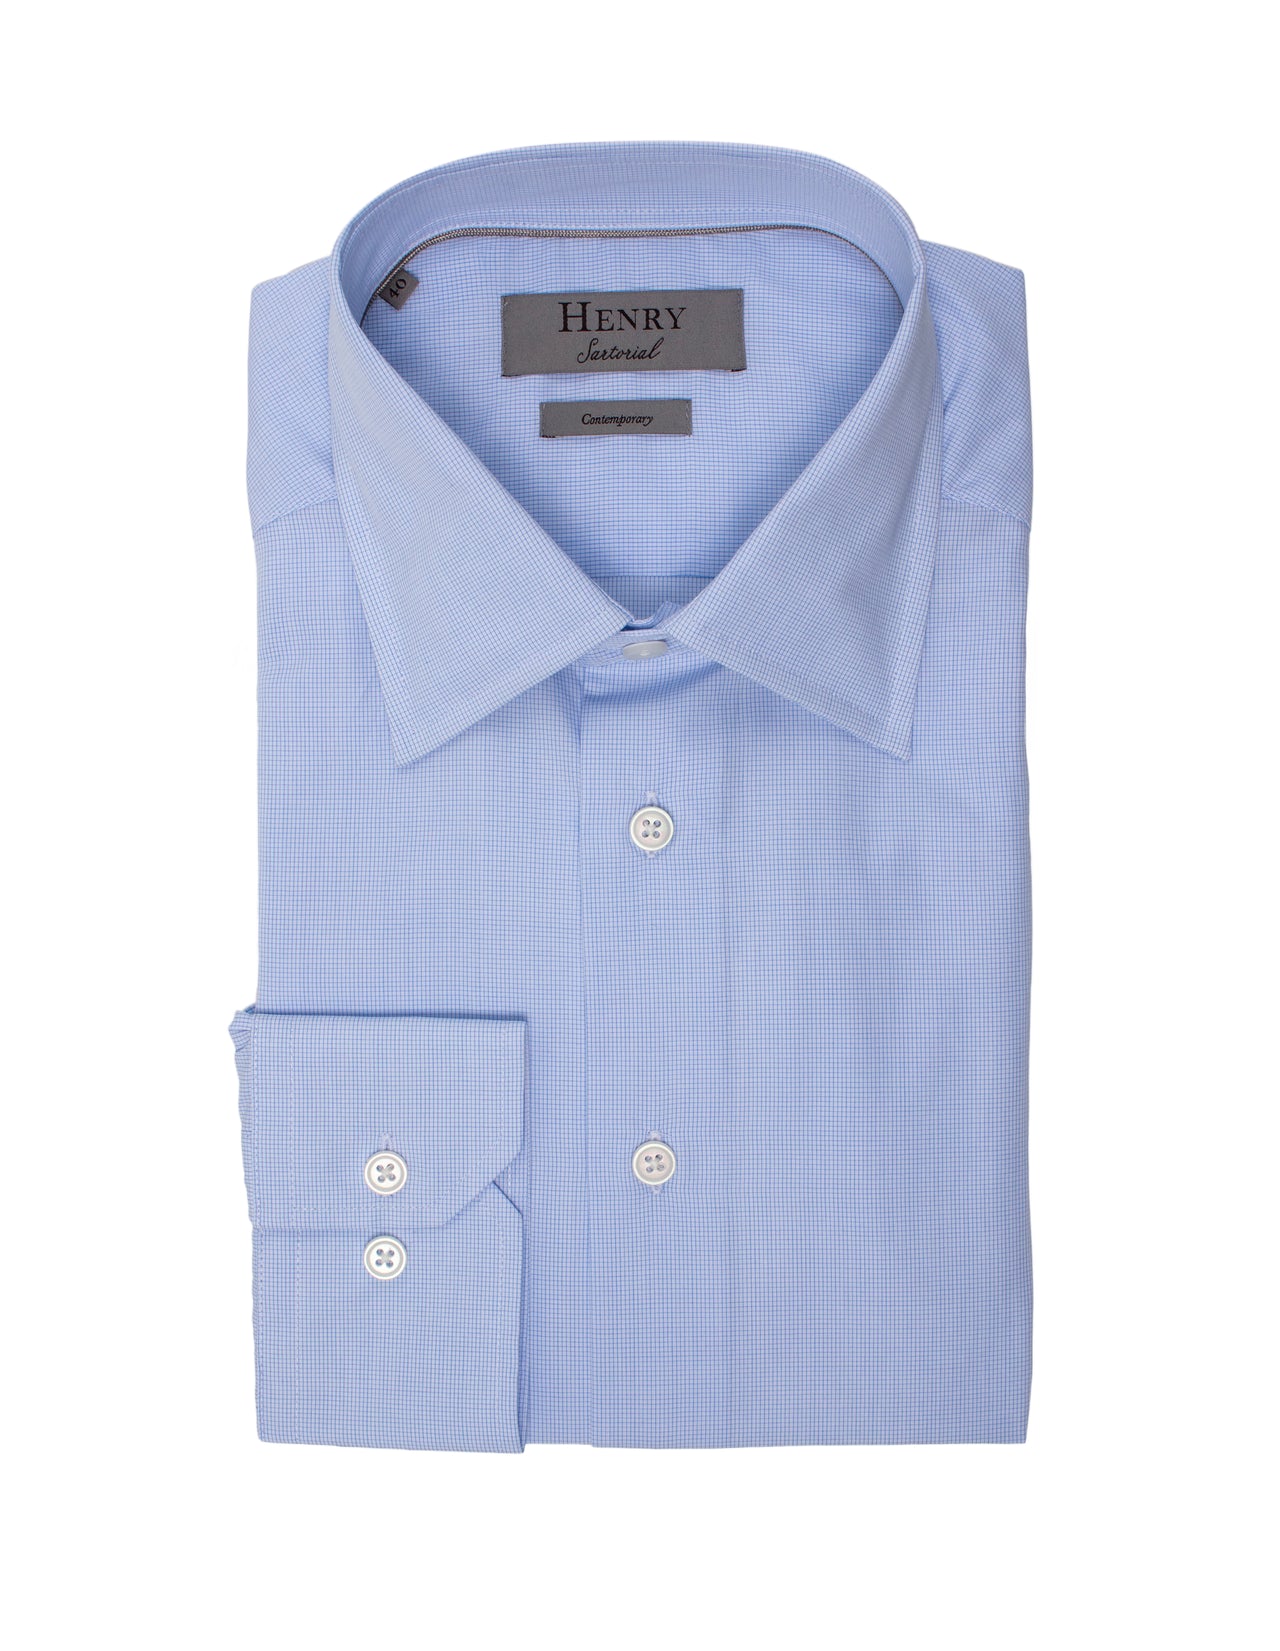 HENRY SARTORIAL Classic Fit Micro Check Shirt BLUE